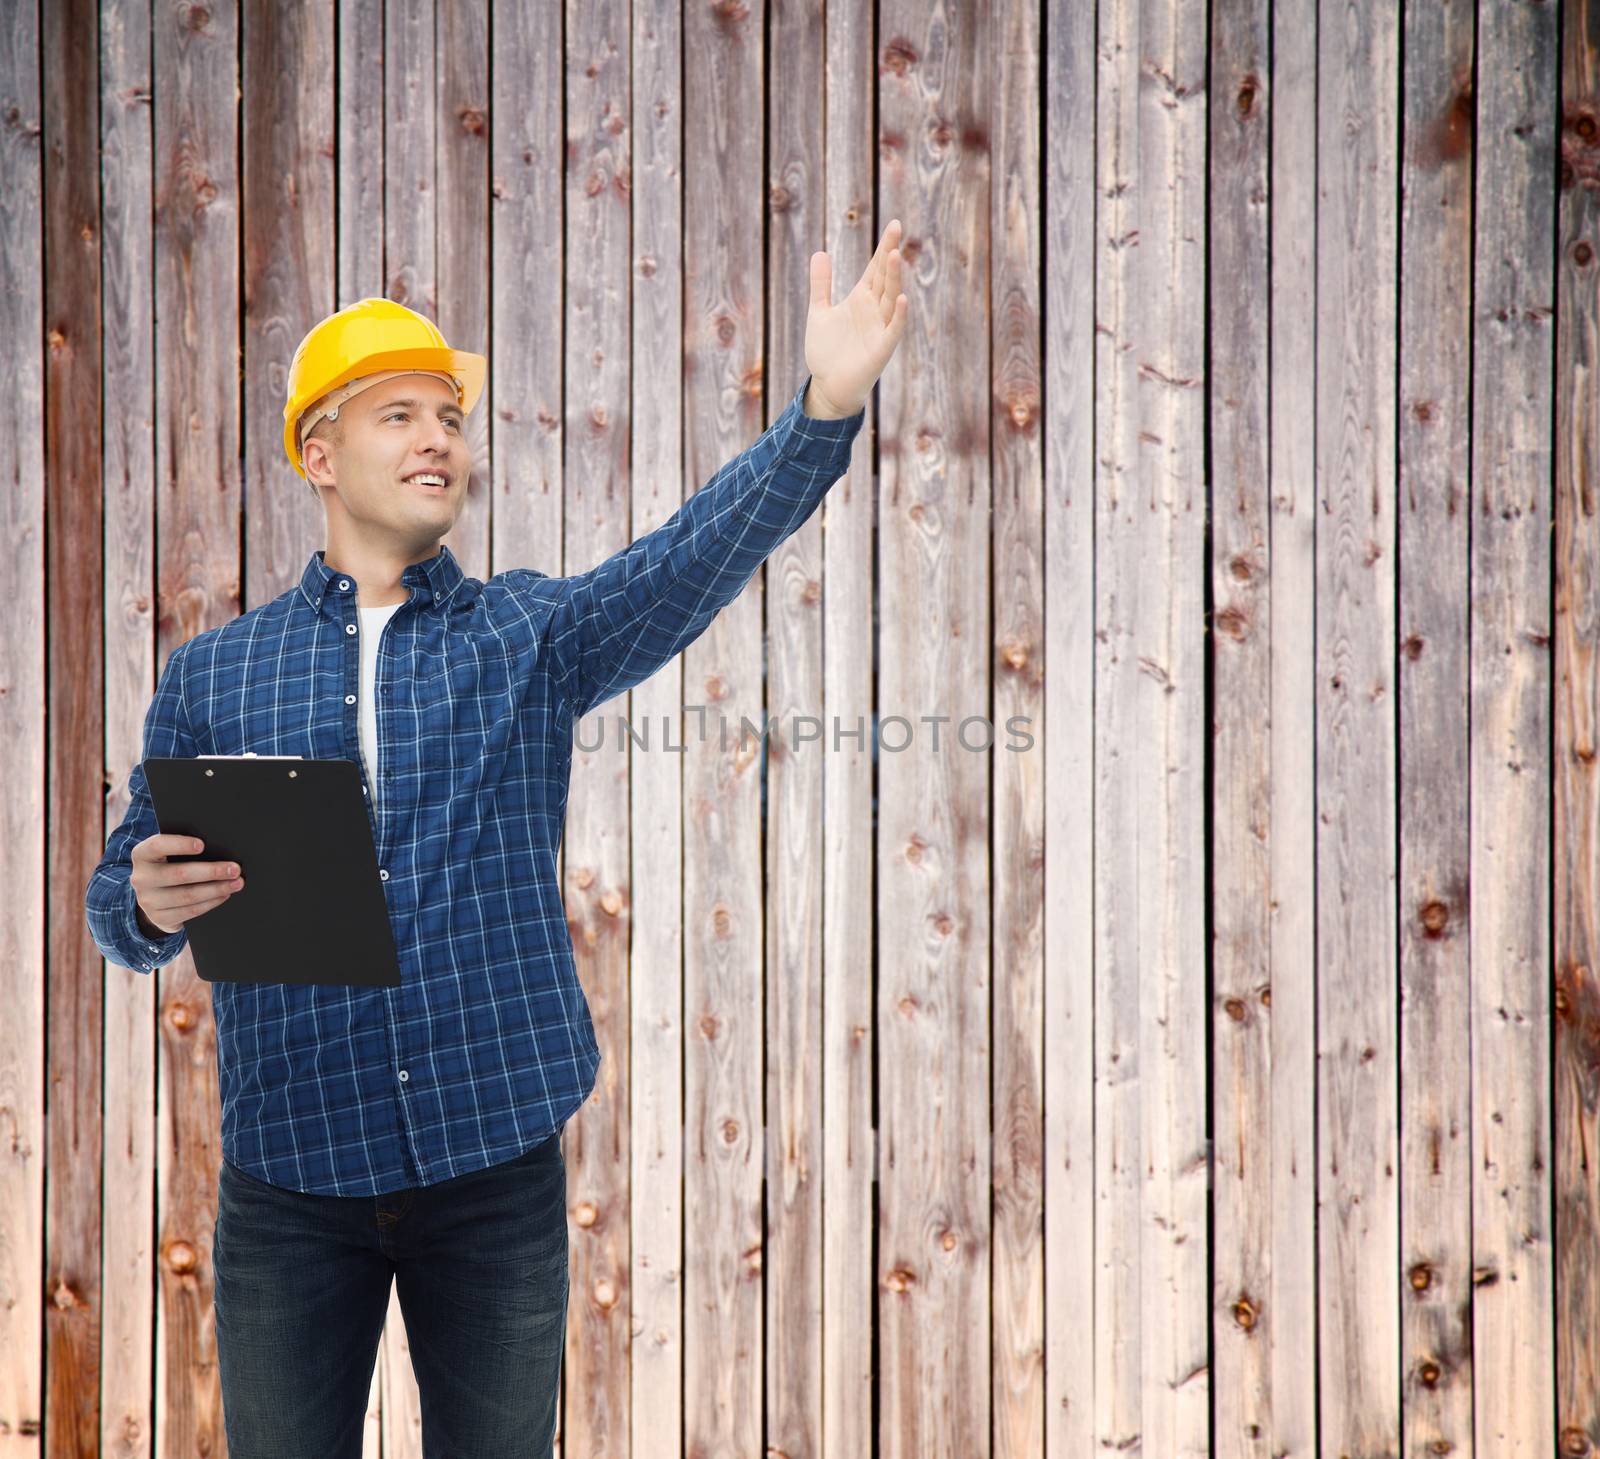 repair, construction, building, people and maintenance concept - smiling male builder or manual worker in helmet with clipboard pointing hand over wooden fence background